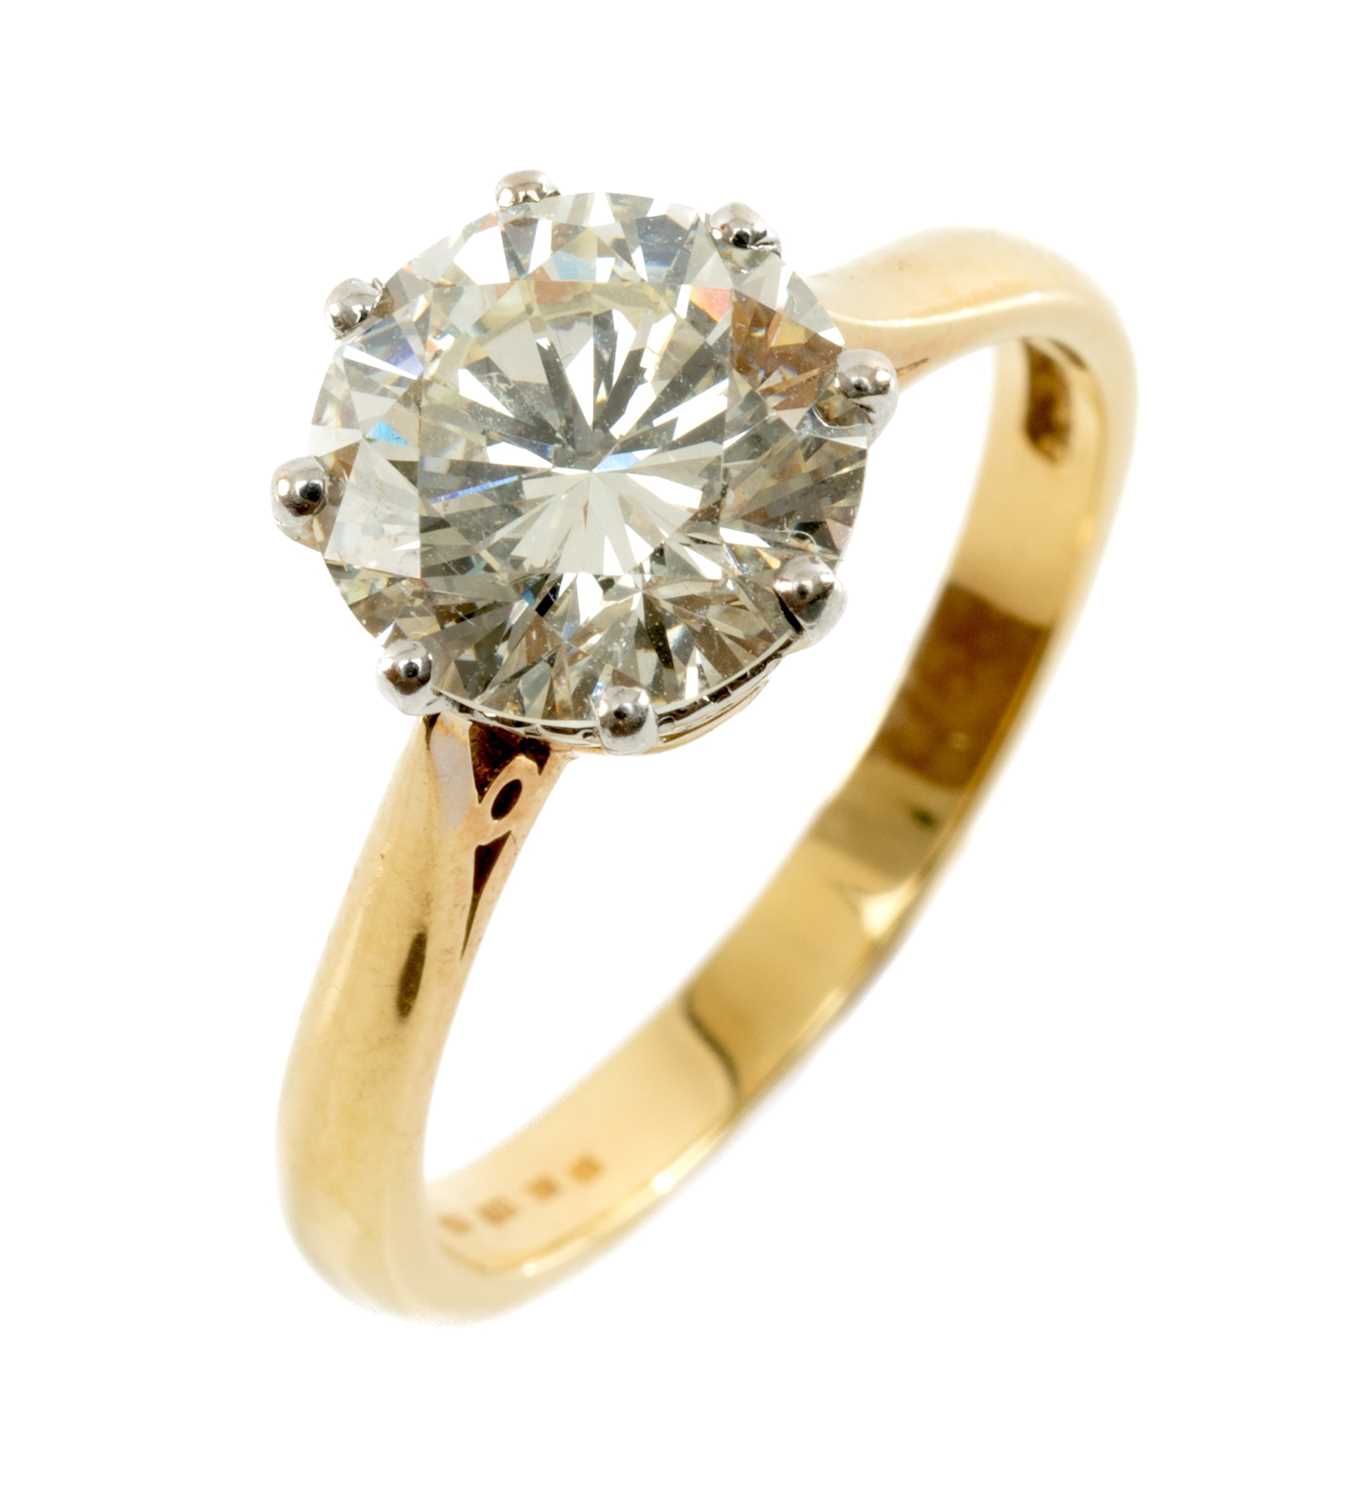 18CT GOLD SOLITAIRE DIAMOND RING, the single claw set round brilliant stone measuring 2.2cts